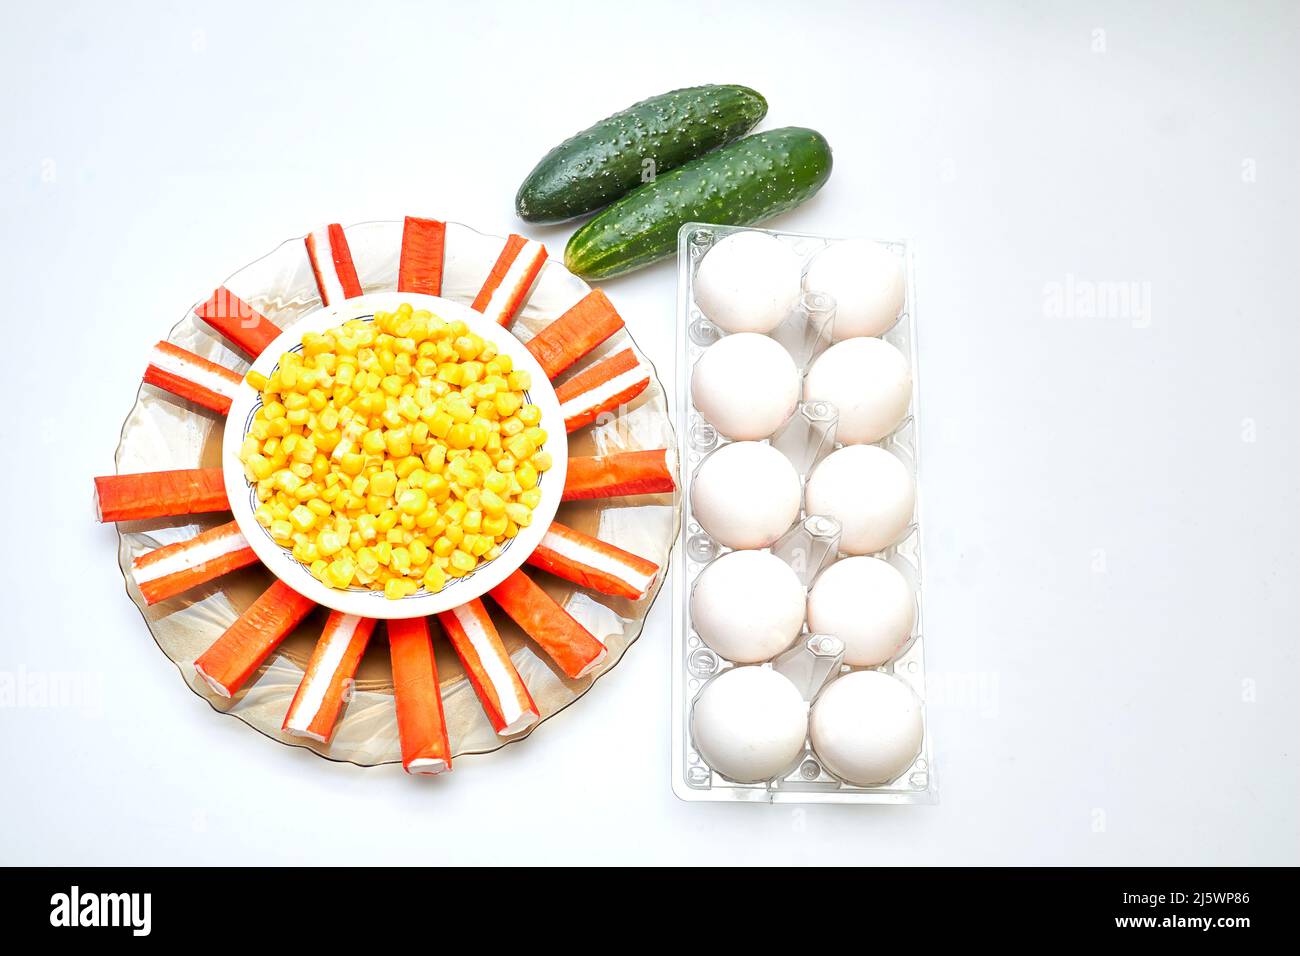 Fresh salad ingredients. Corn, eggs, cucumbers and crab sticks.Isolated Stock Photo